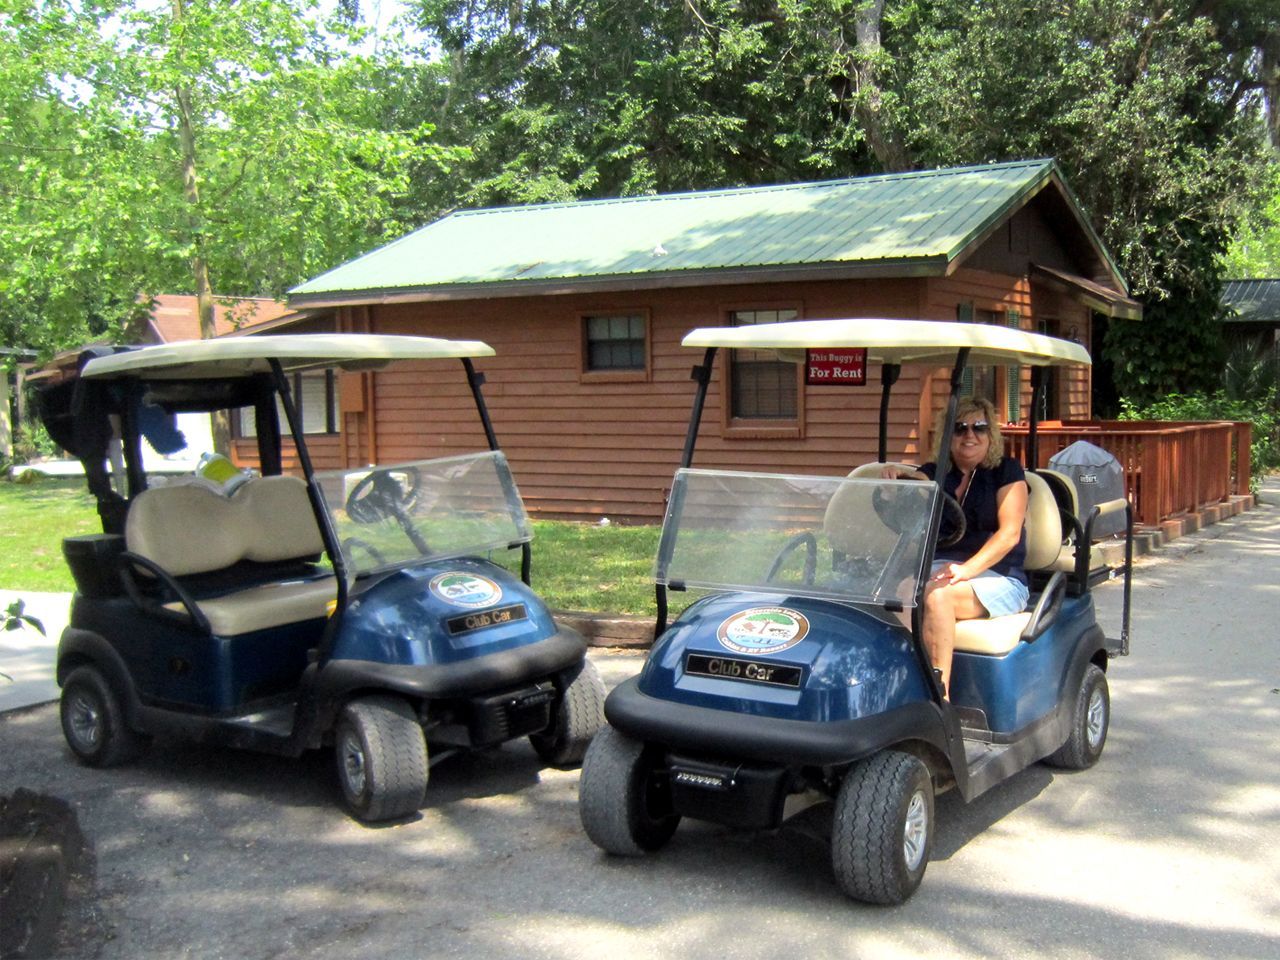 two golf carts are parked in front of a cabin